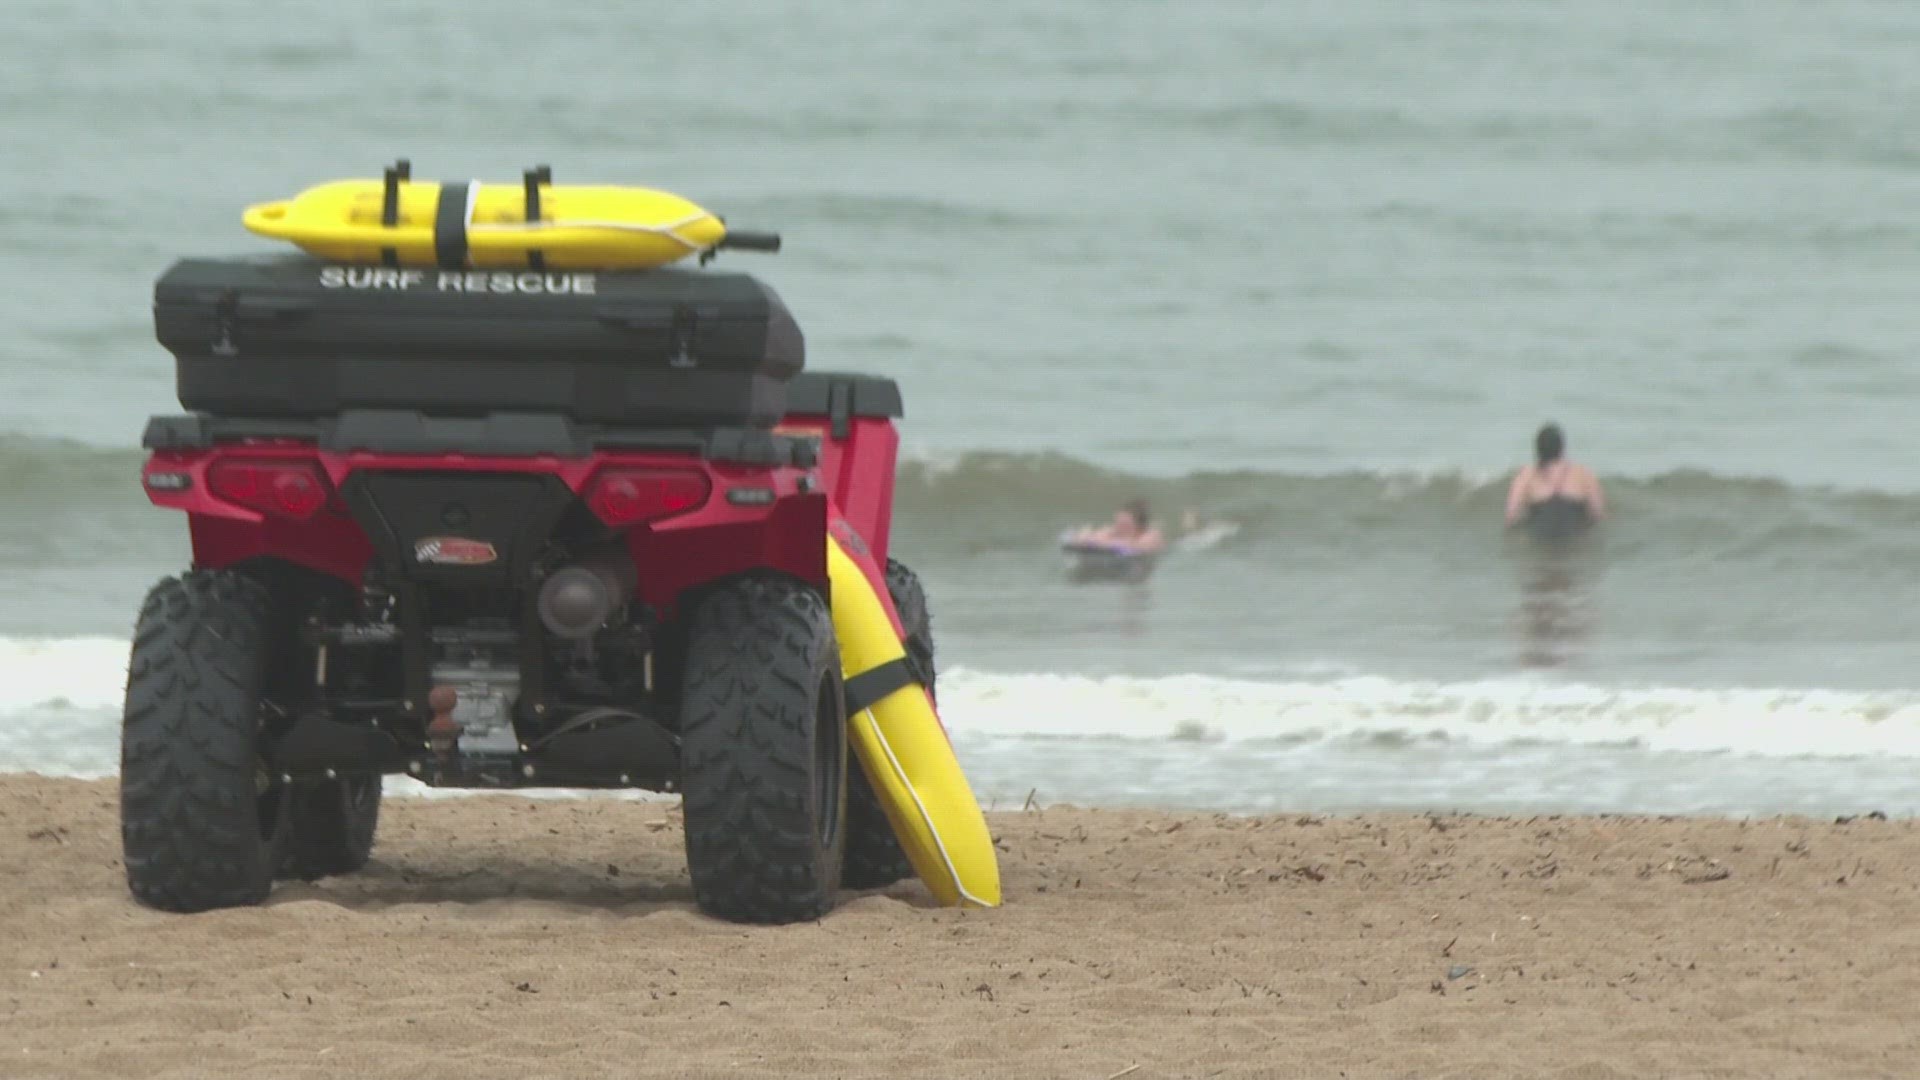 “Earlier this season, we've already pulled out 20-something people," a lifeguard captain said on rescuing people from the beach.